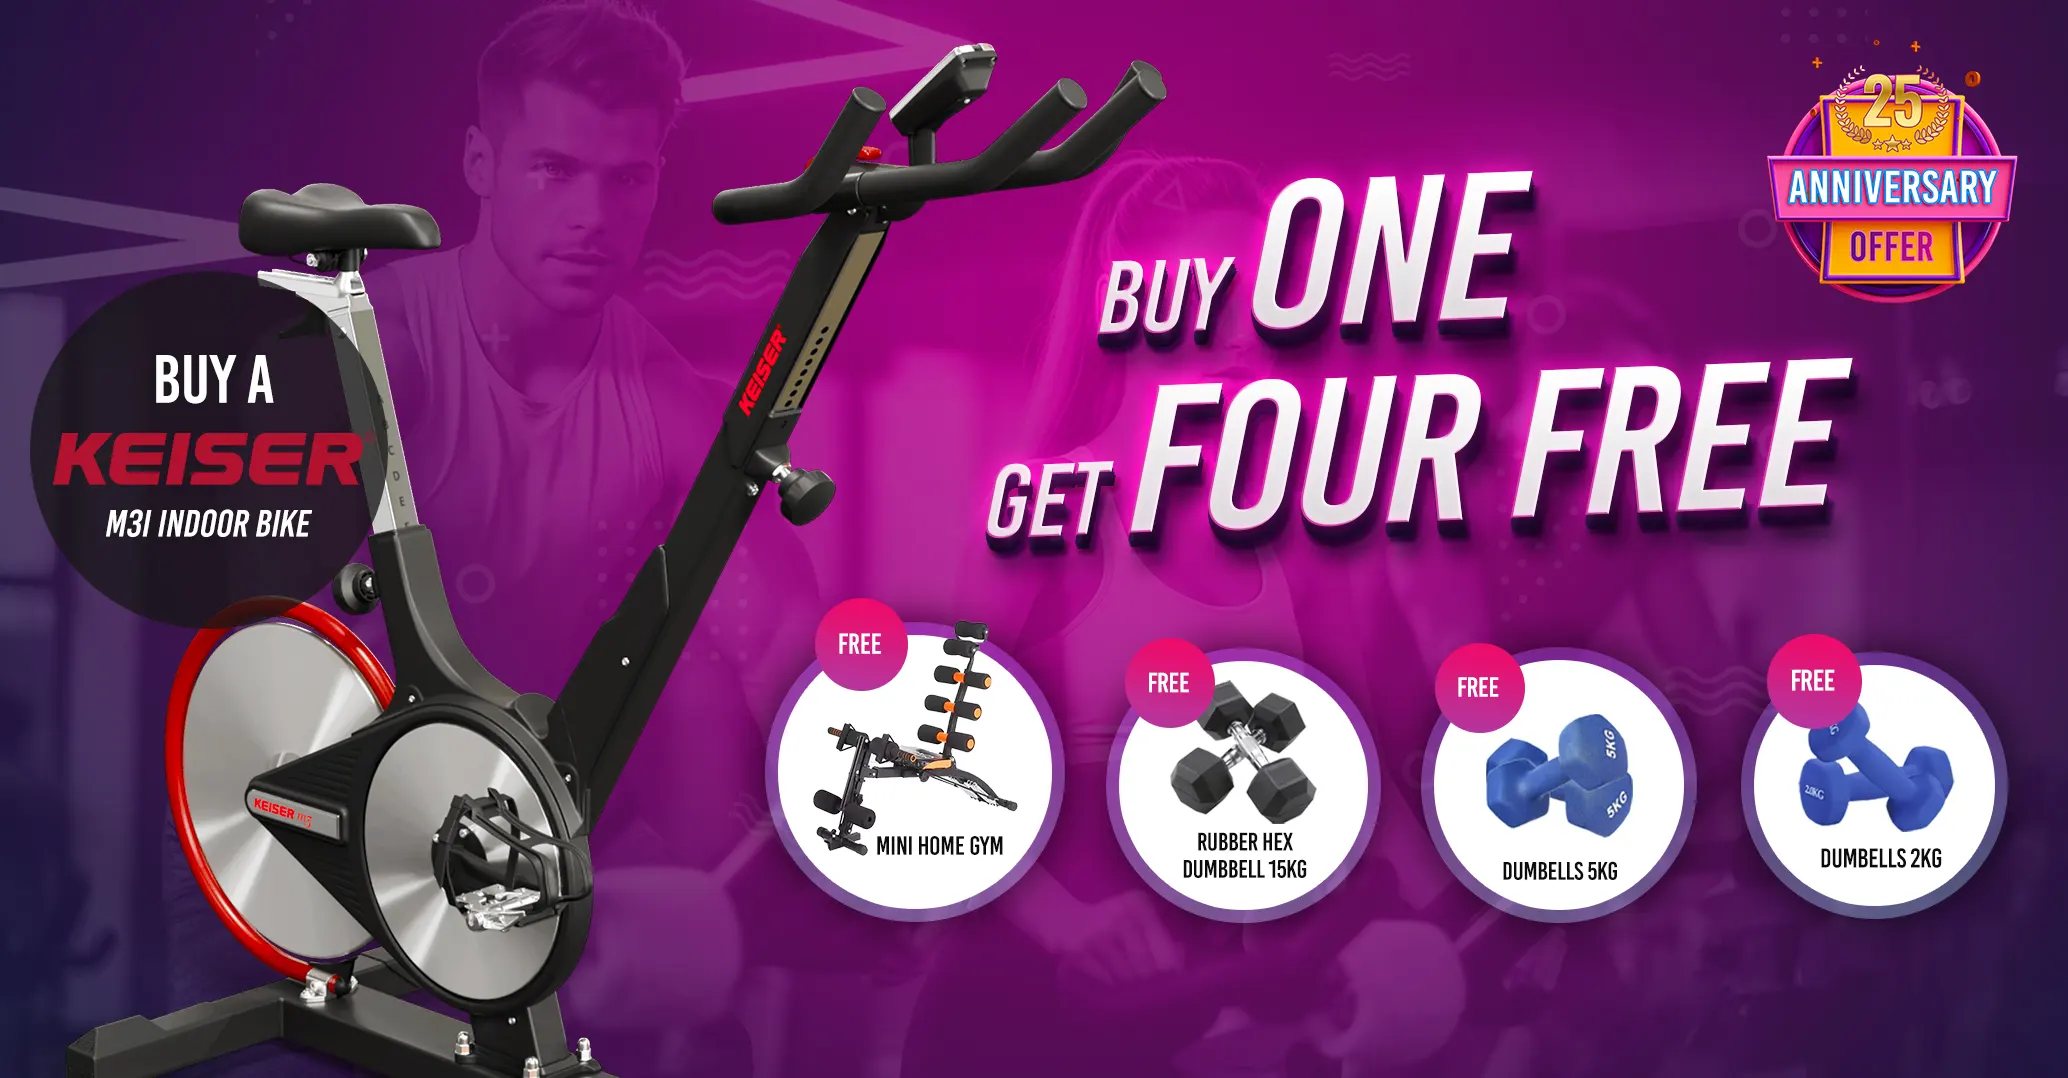 Quantum Fitness Offers, Buy 1 Get 1 Offers